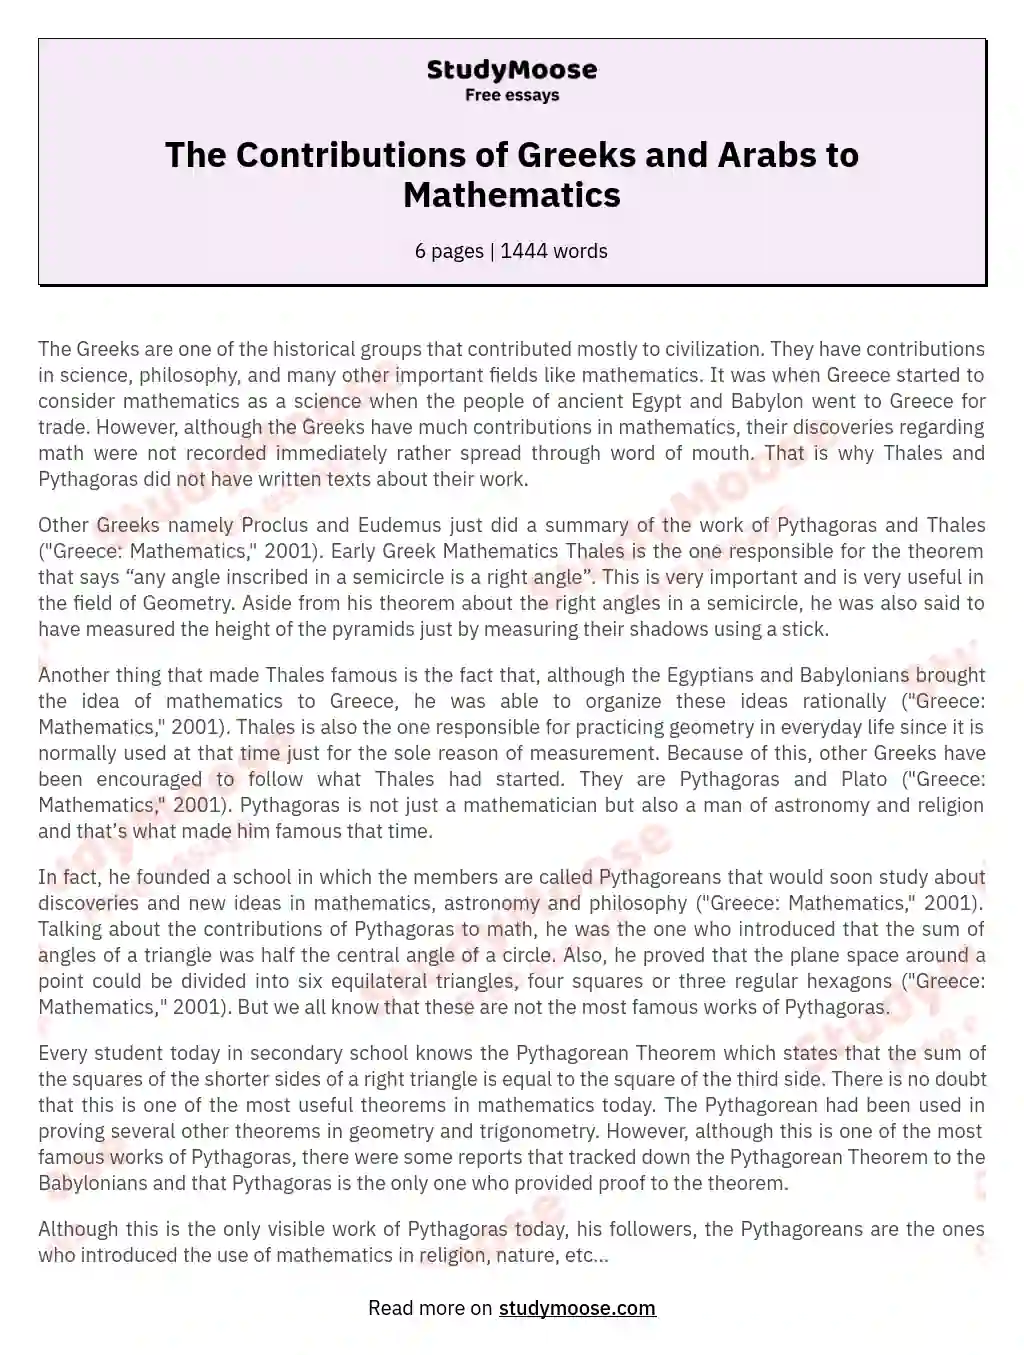 The Contributions of Greeks and Arabs to Mathematics